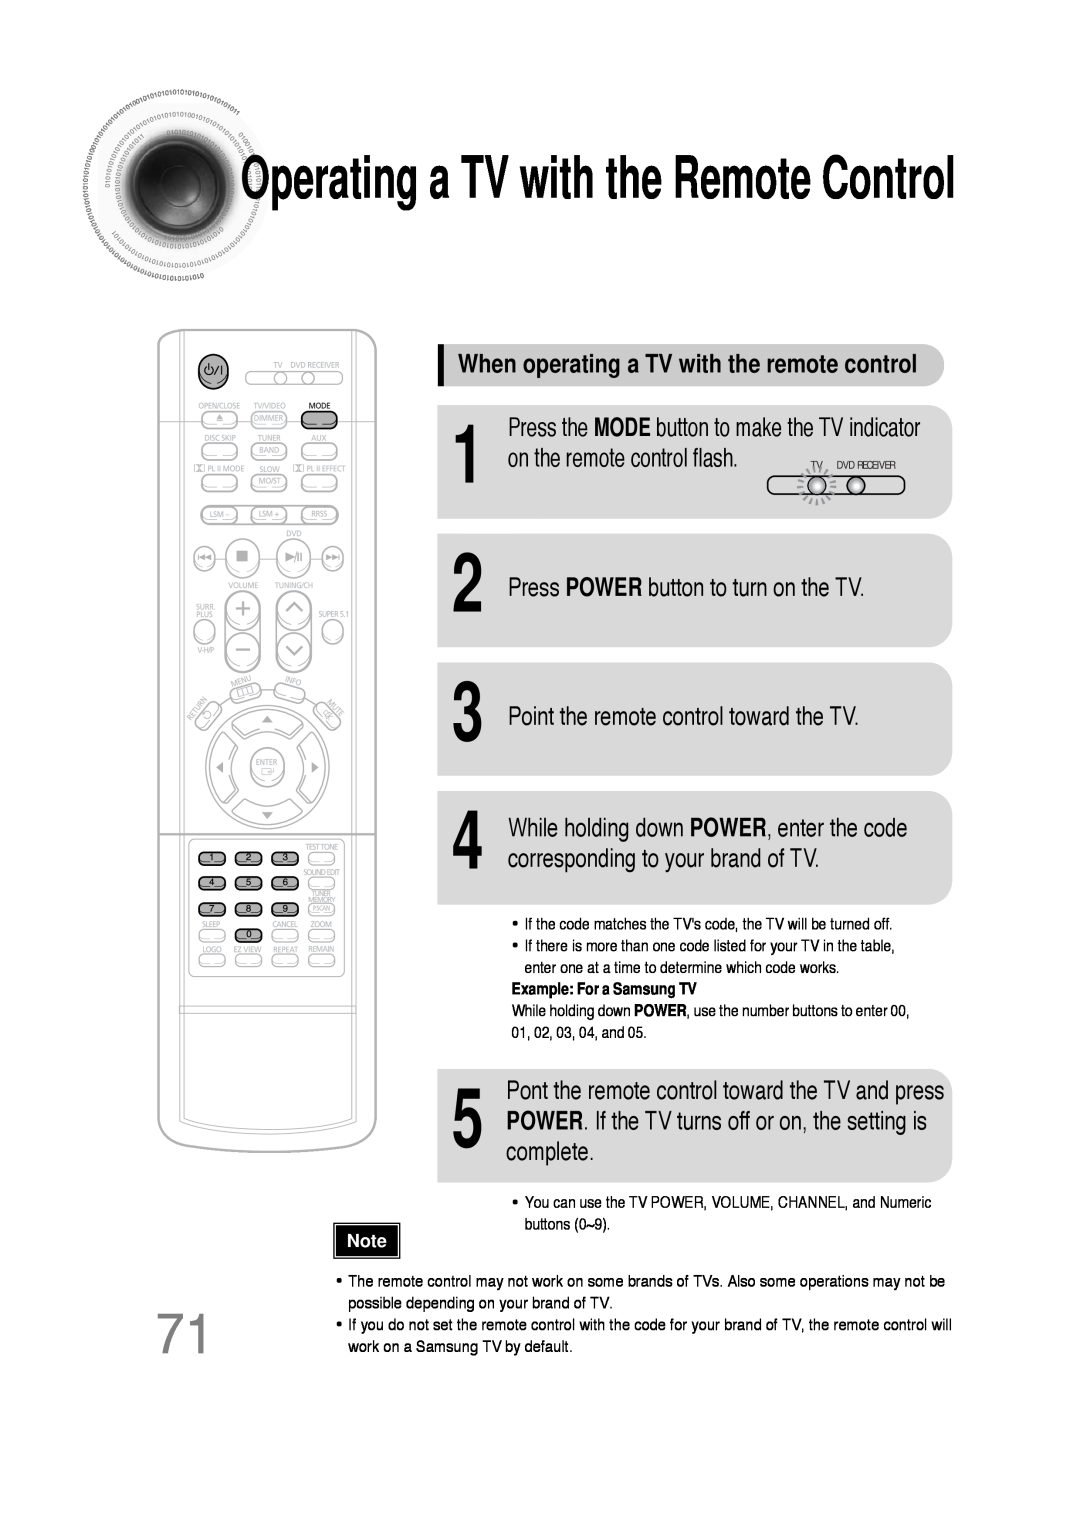 Samsung 20051111103302296 instruction manual Operatinga TV with the Remote Control, corresponding to your brand of TV 